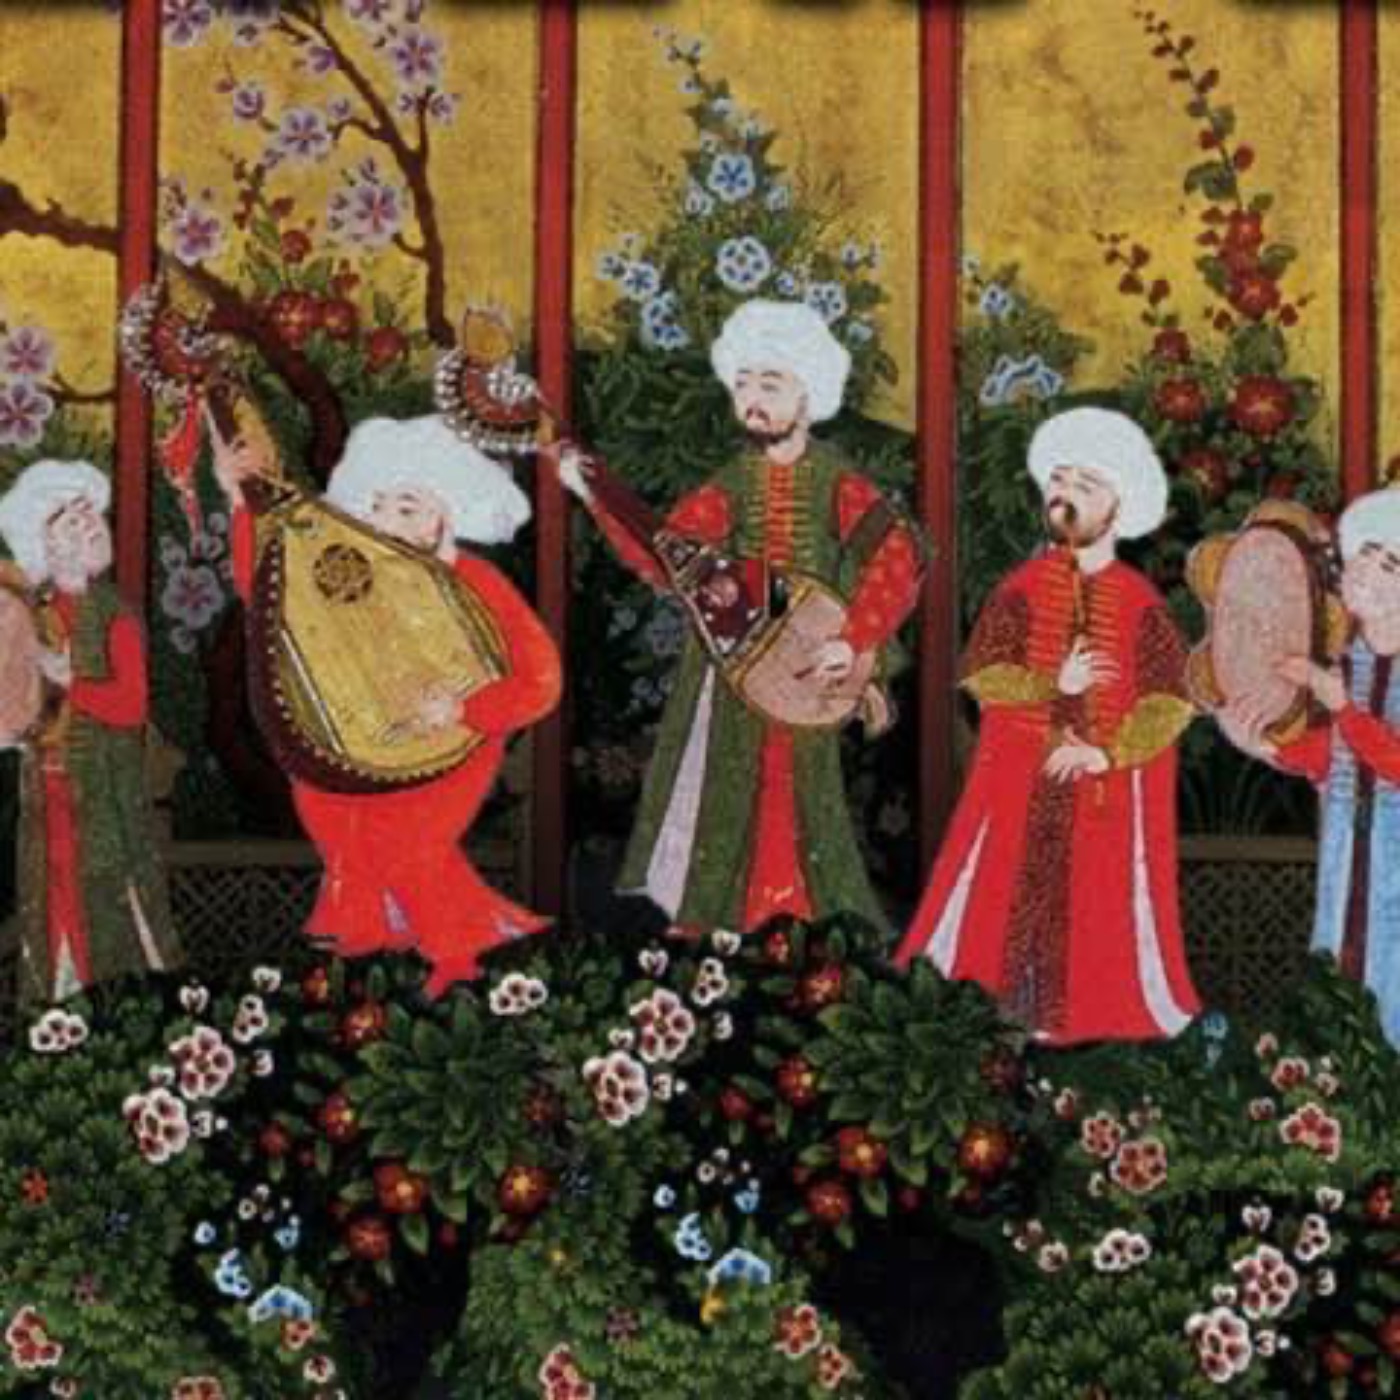 Music in the Islamic World (Part 2)